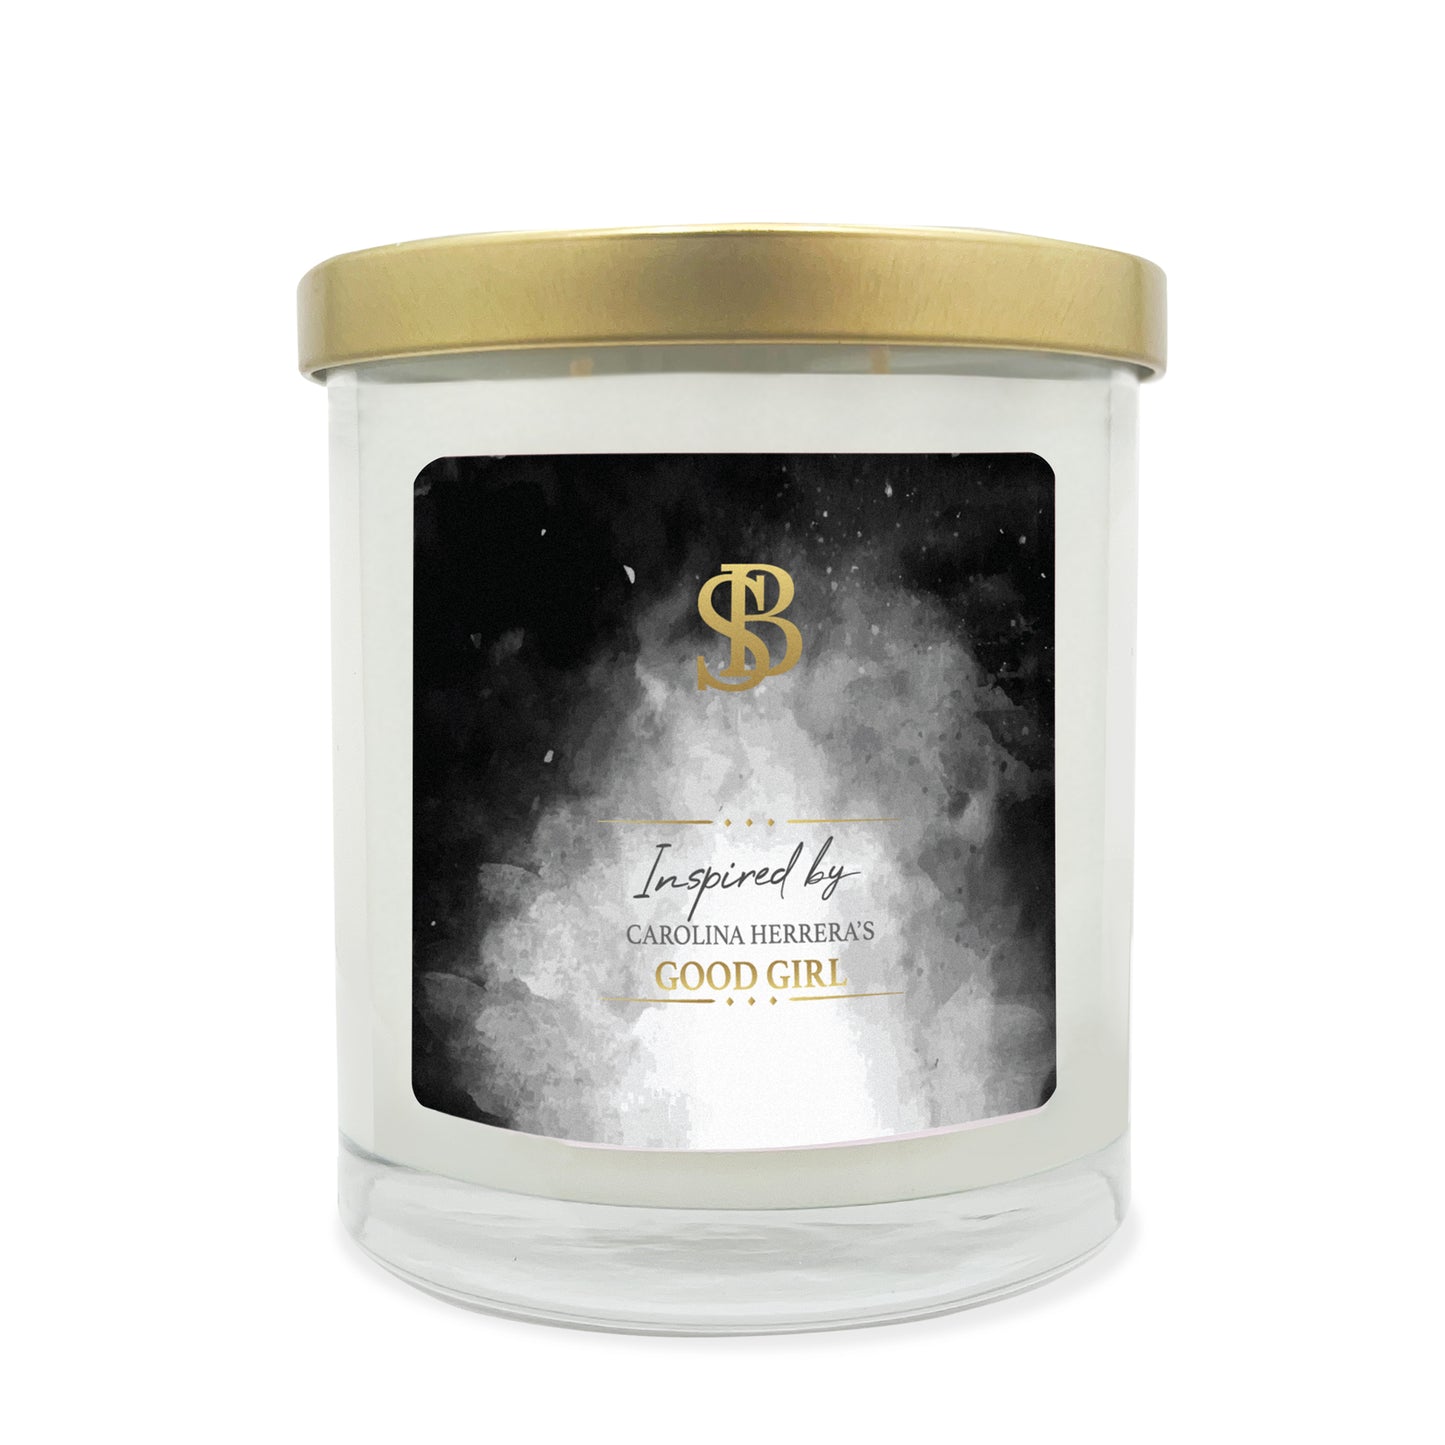 INSPIRED BY CAROLINA HERRERA'S GOOD GIRL | Soy Scented Candle 11 oz